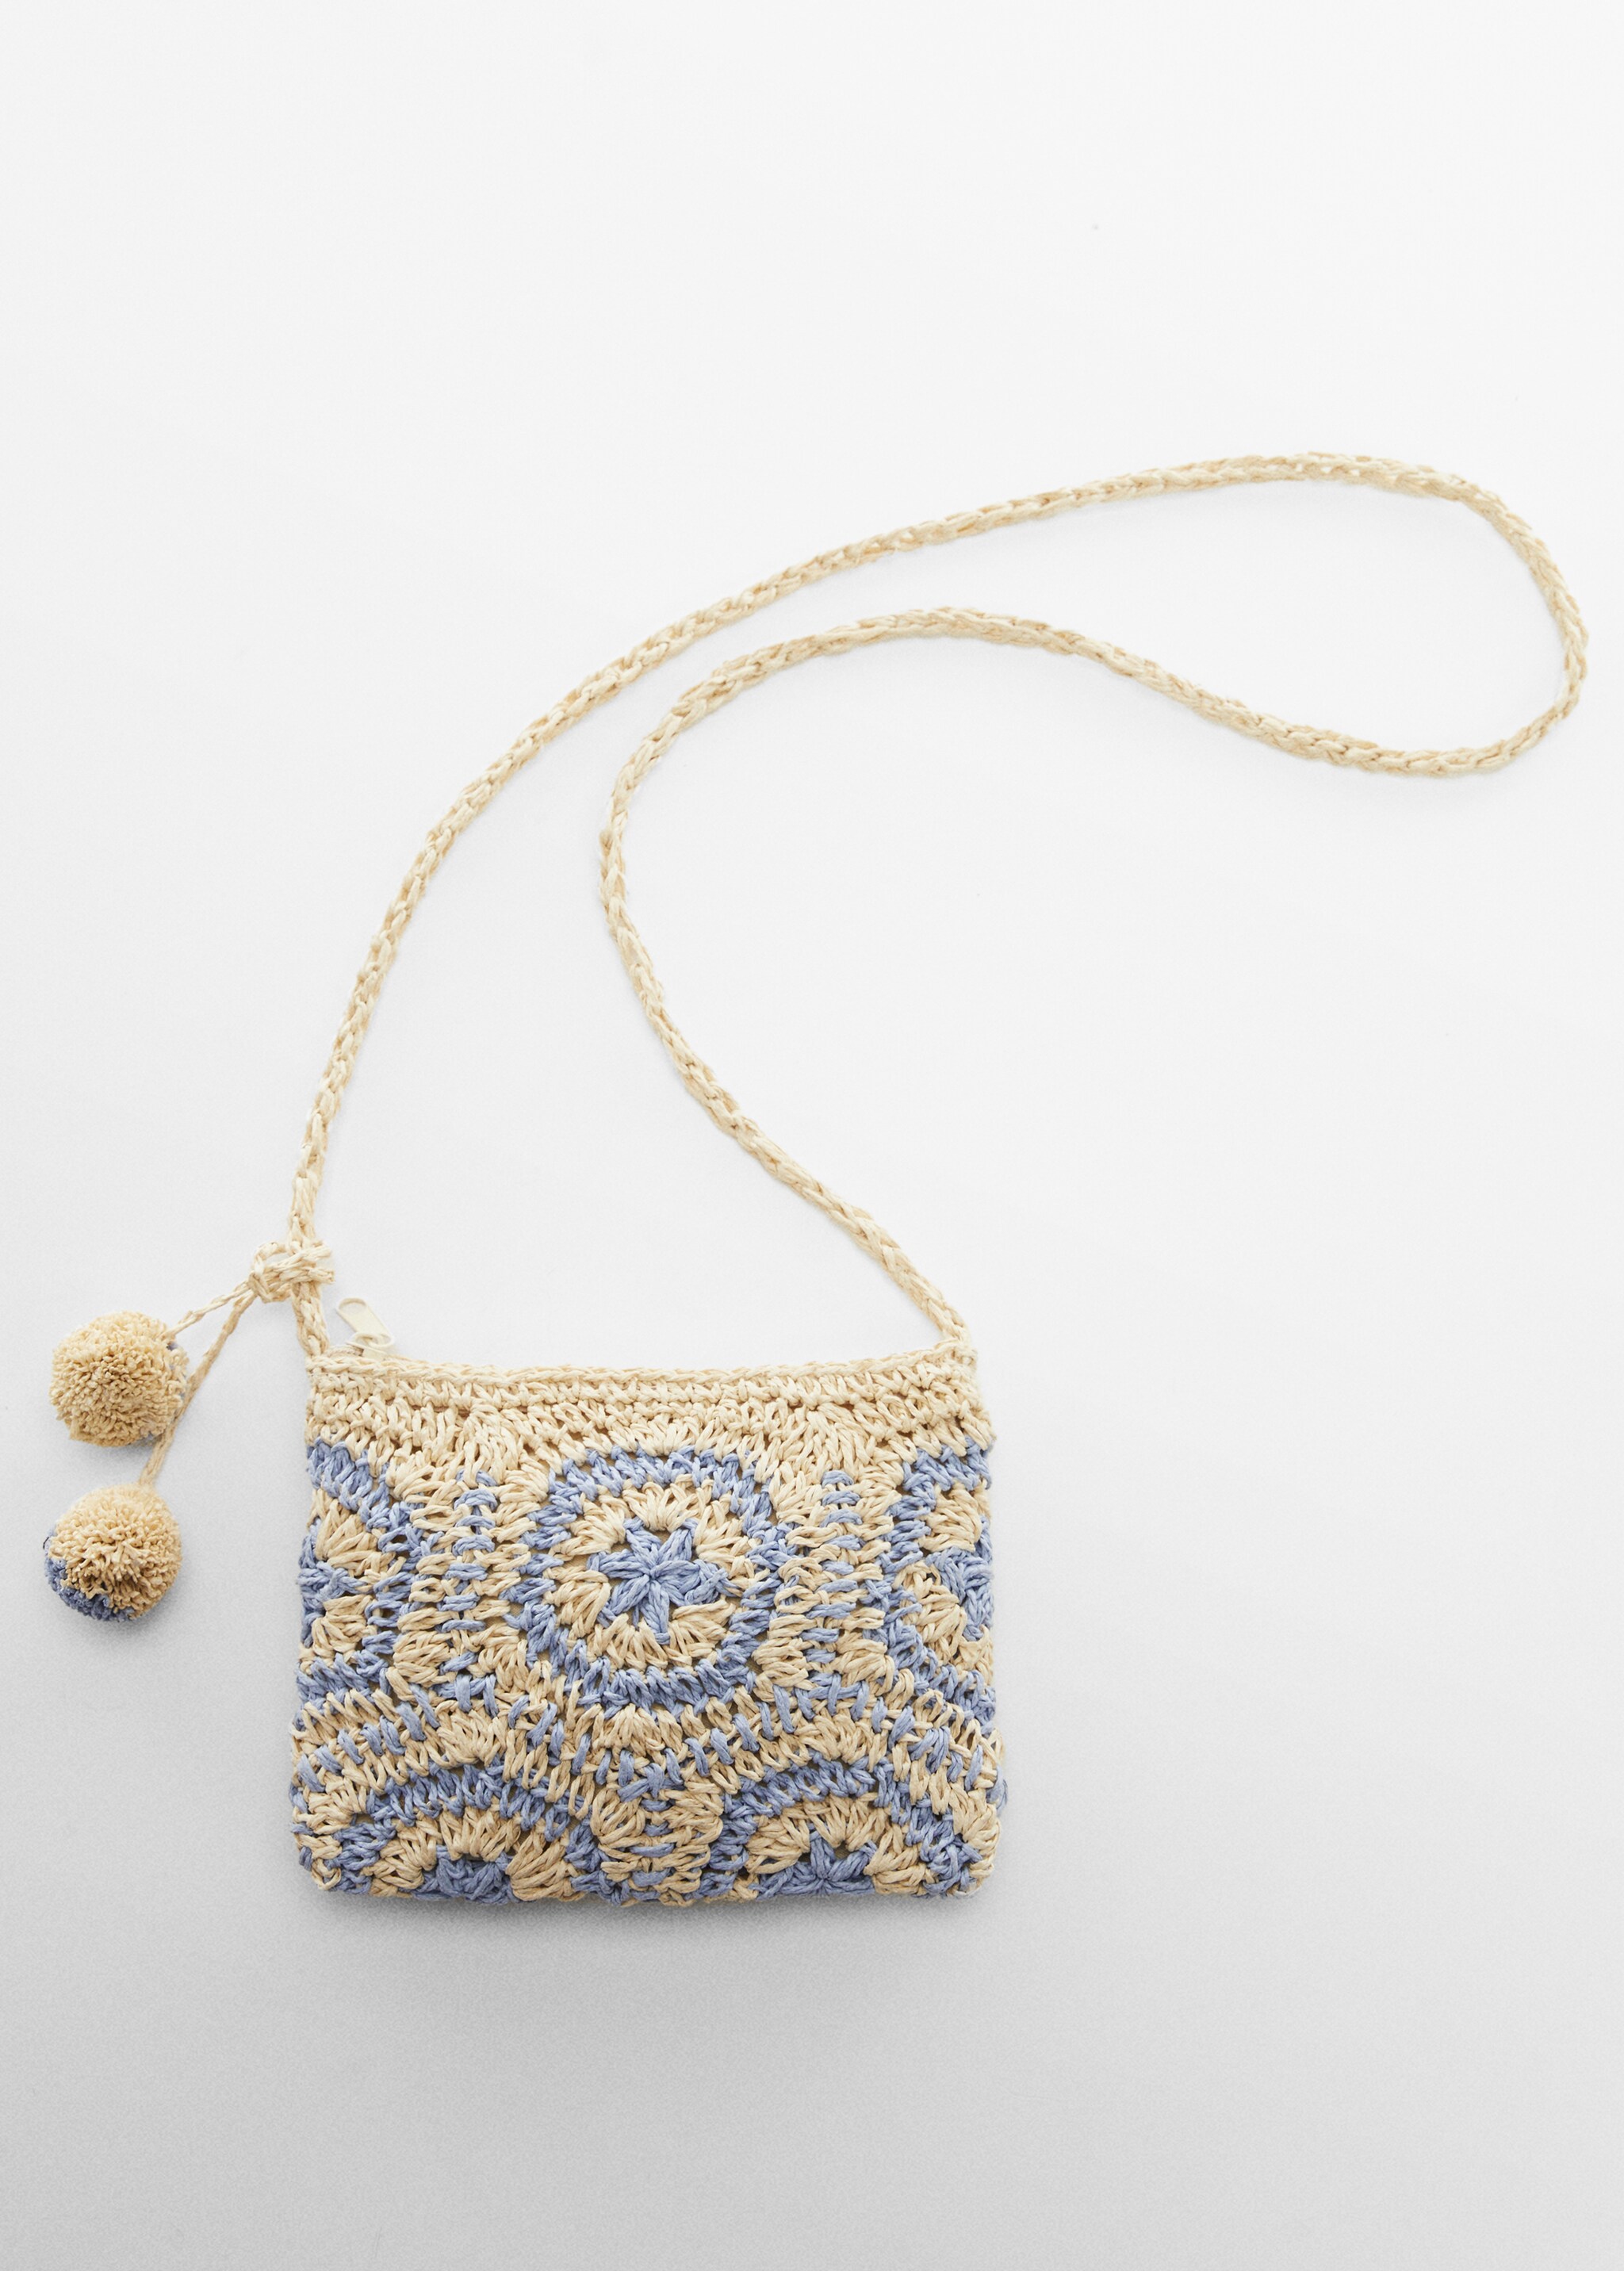 Raffia bag with tassels - Details of the article 2